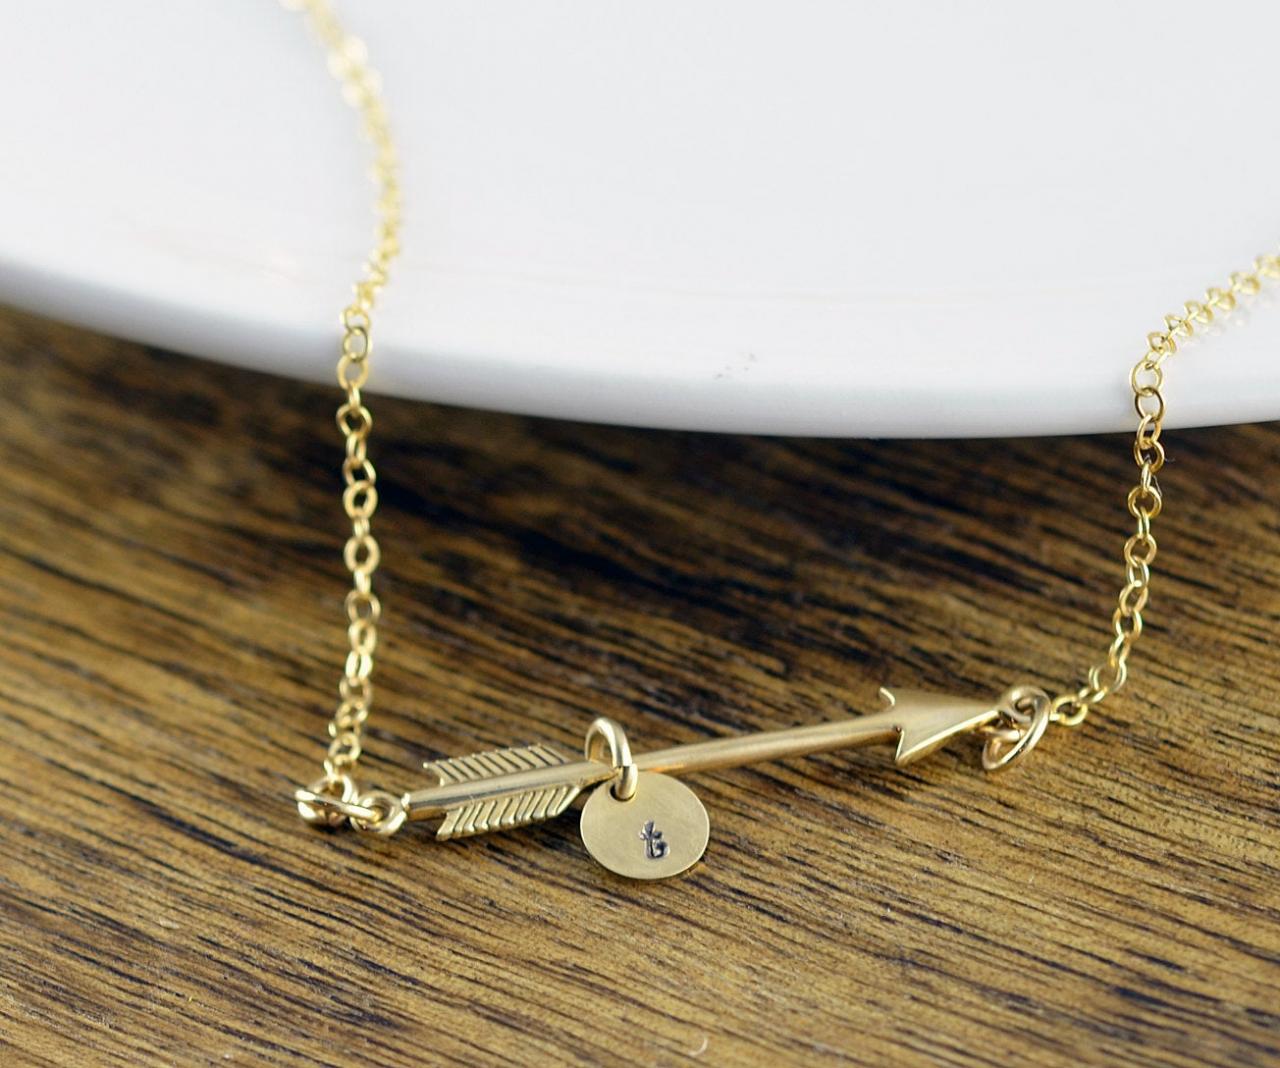 Personalized Arrow Necklace - Gold Initial Necklace - Initial Jewelry - Arrow Necklace - Arrow Jewelry - Gold Arrow Necklace